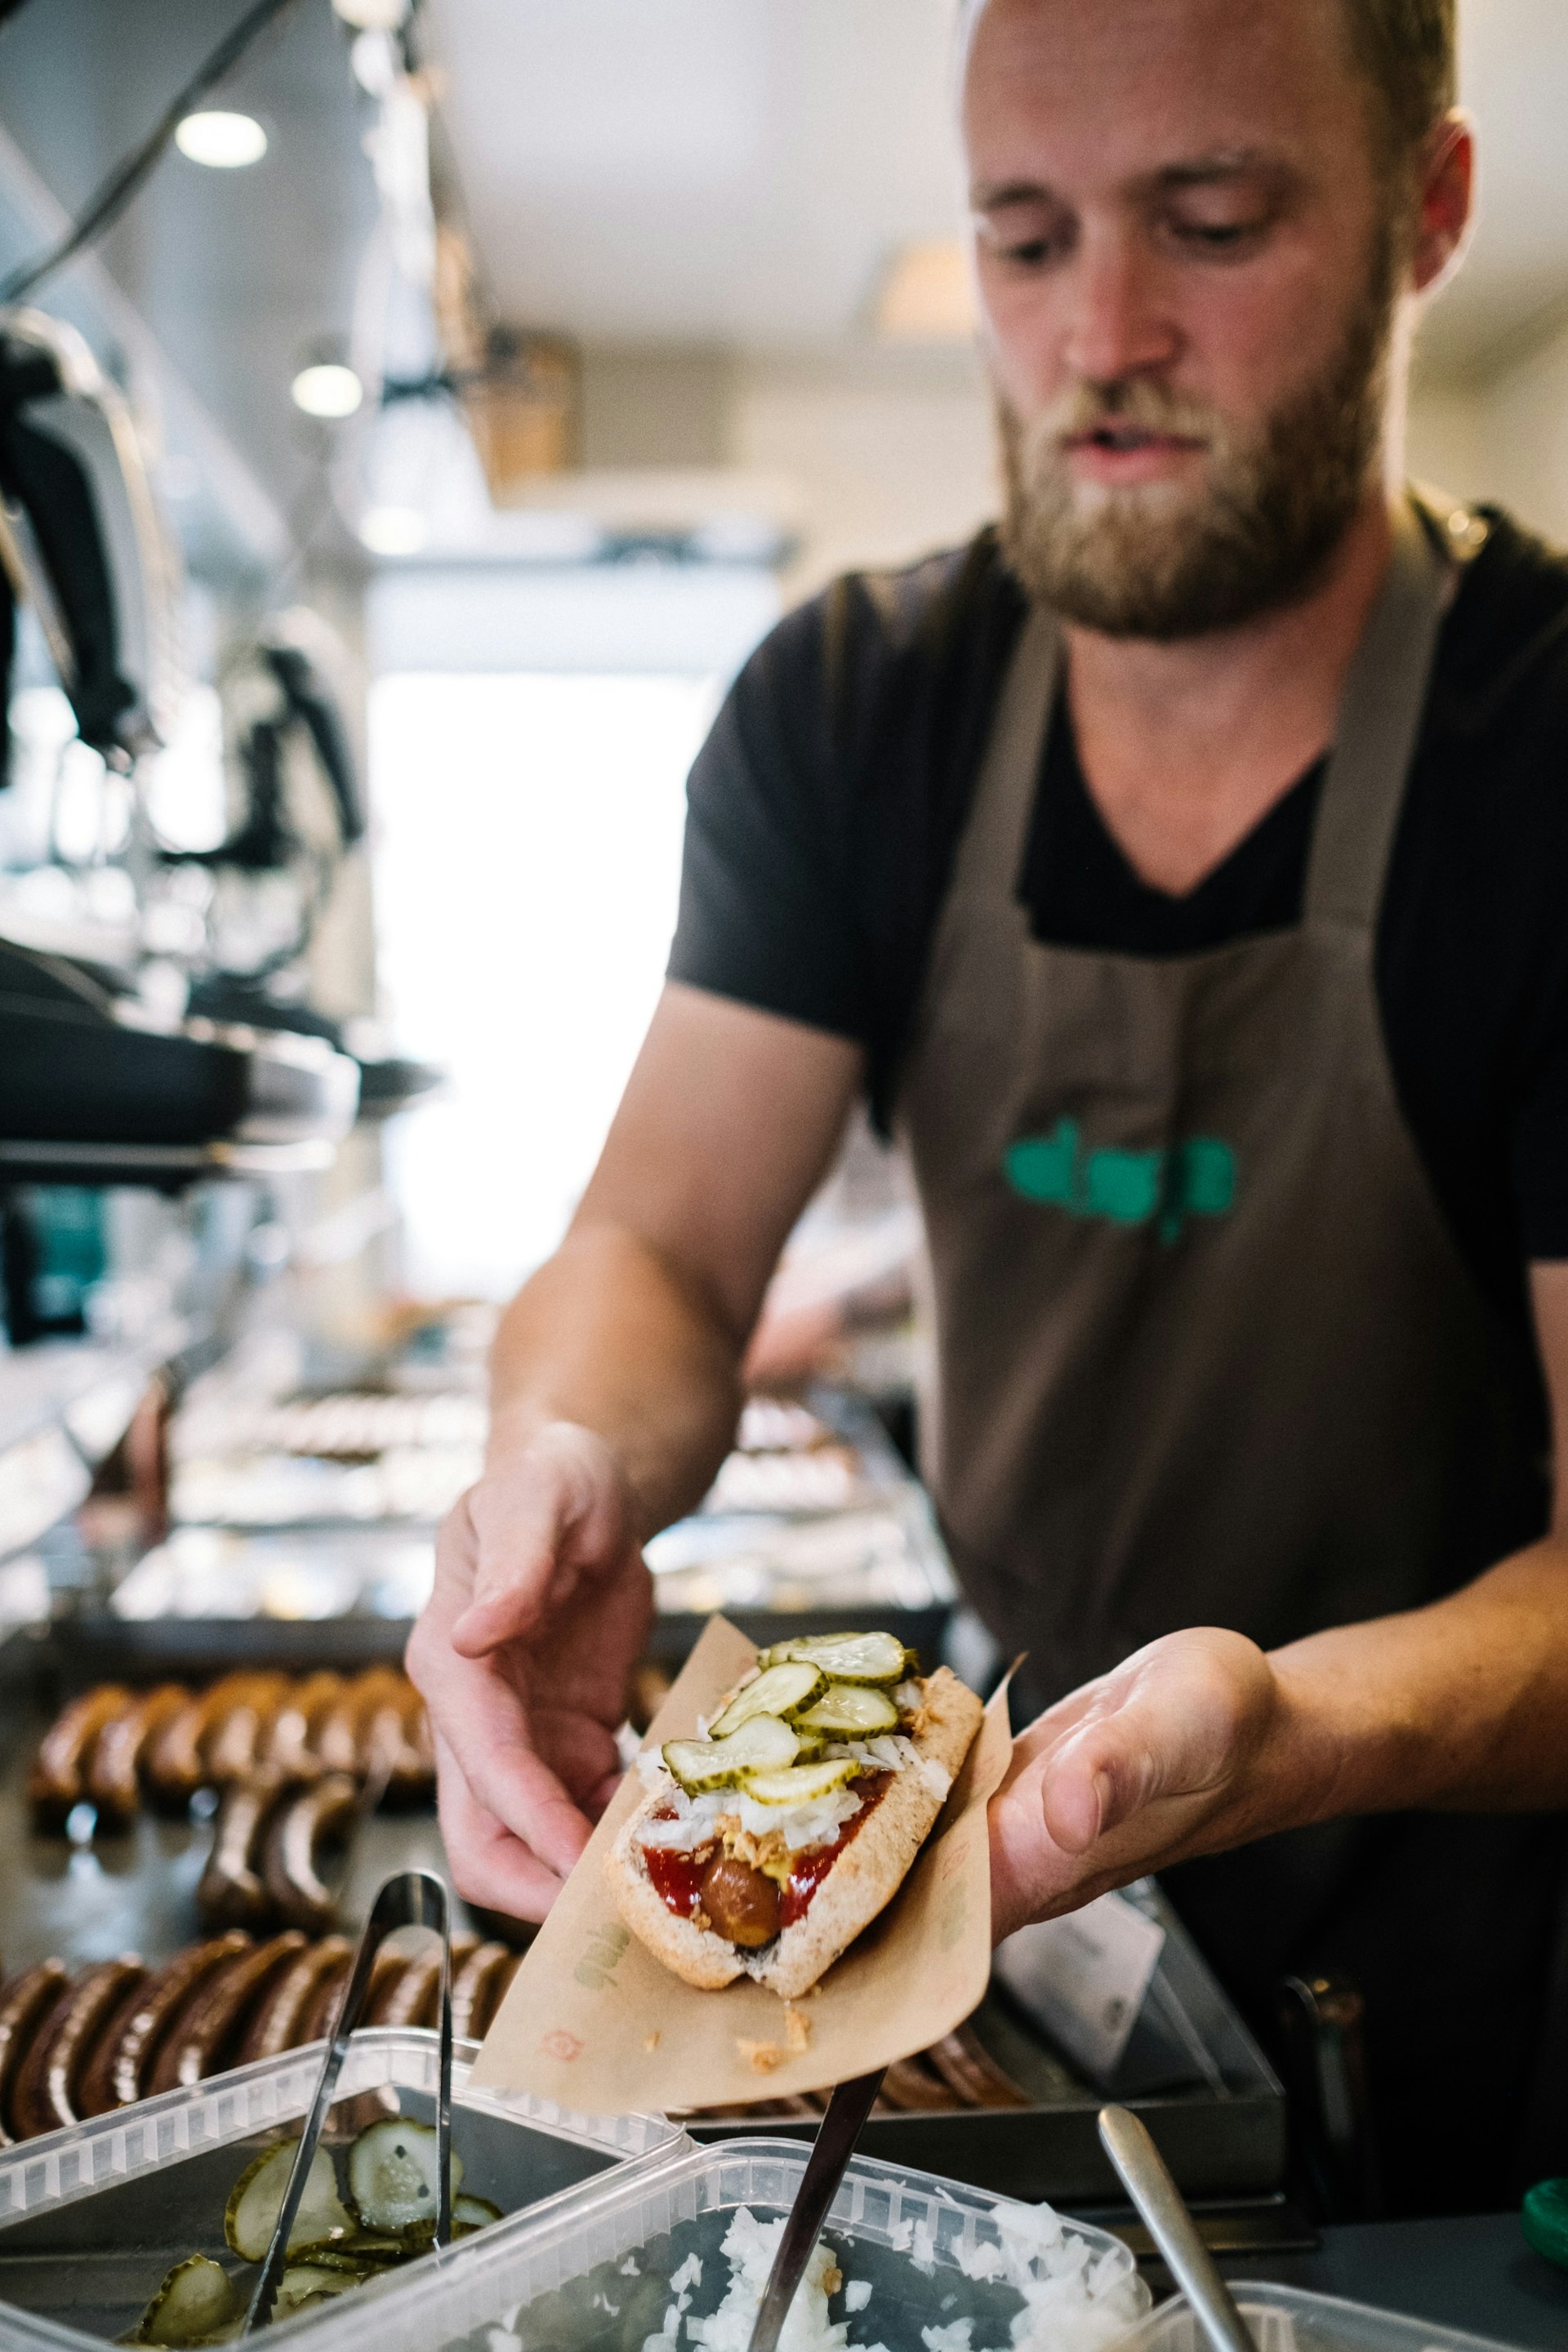 A man prepares toppings for a Danish-style hot dog that he is holding.